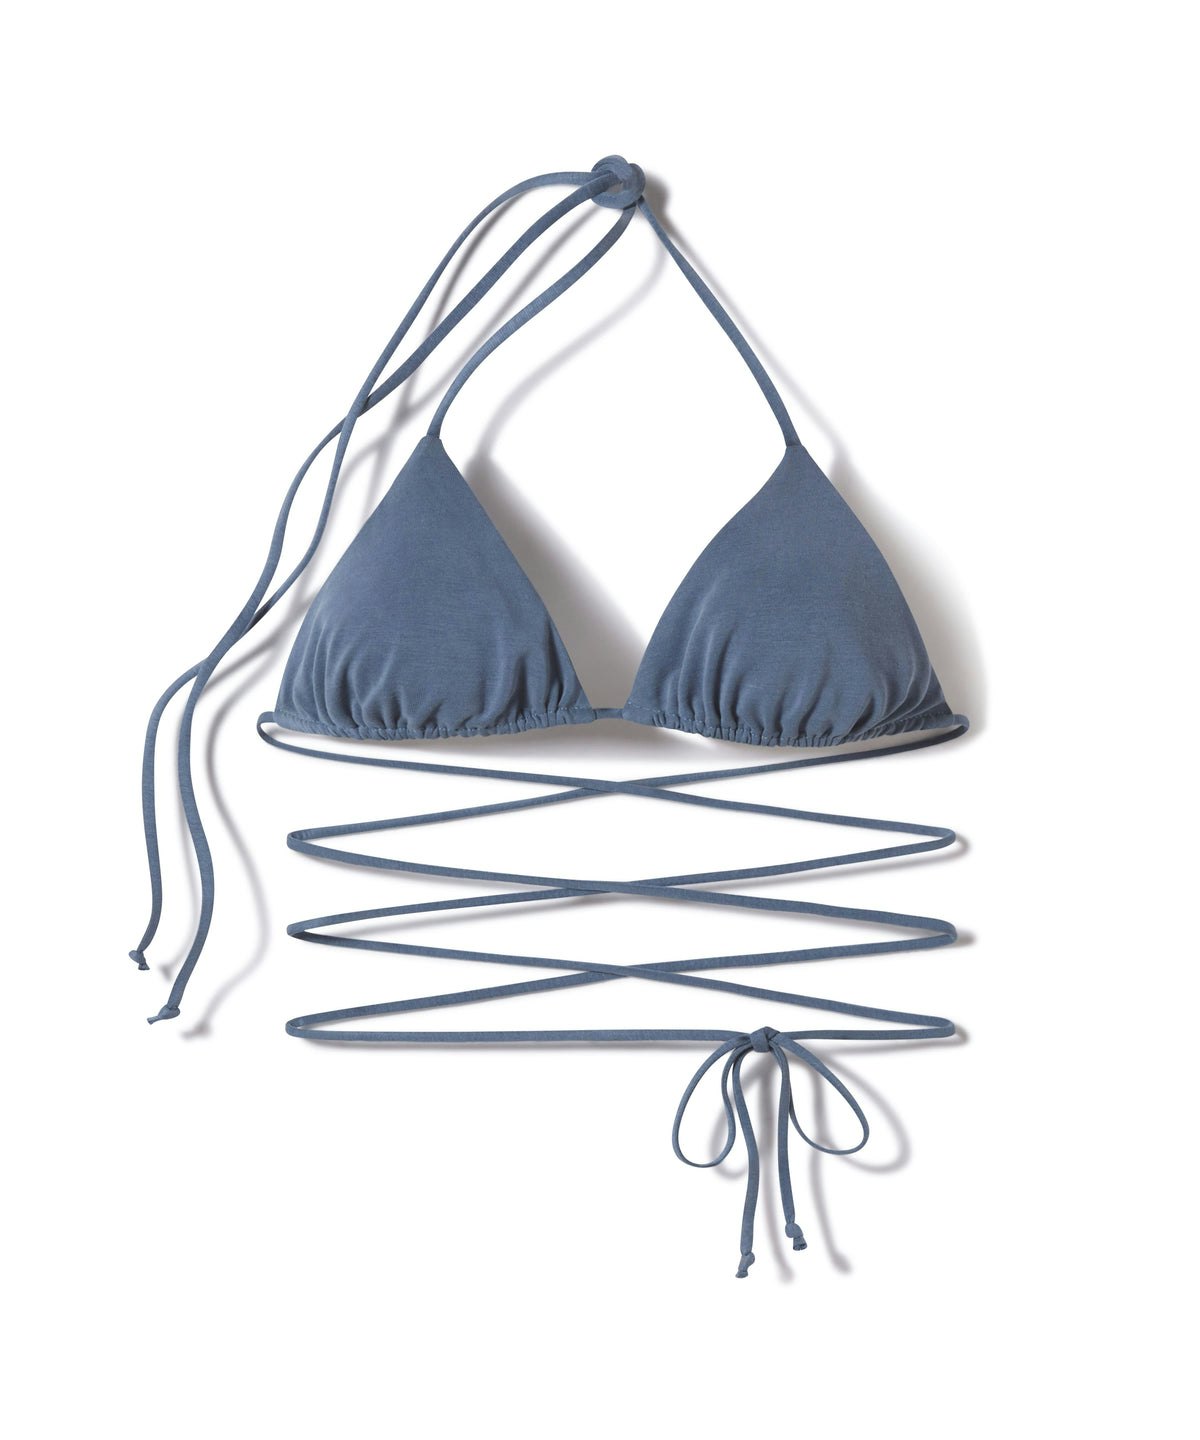 Bikini Trends - What to Expect in 2023 & 2024? :: 360º Textile